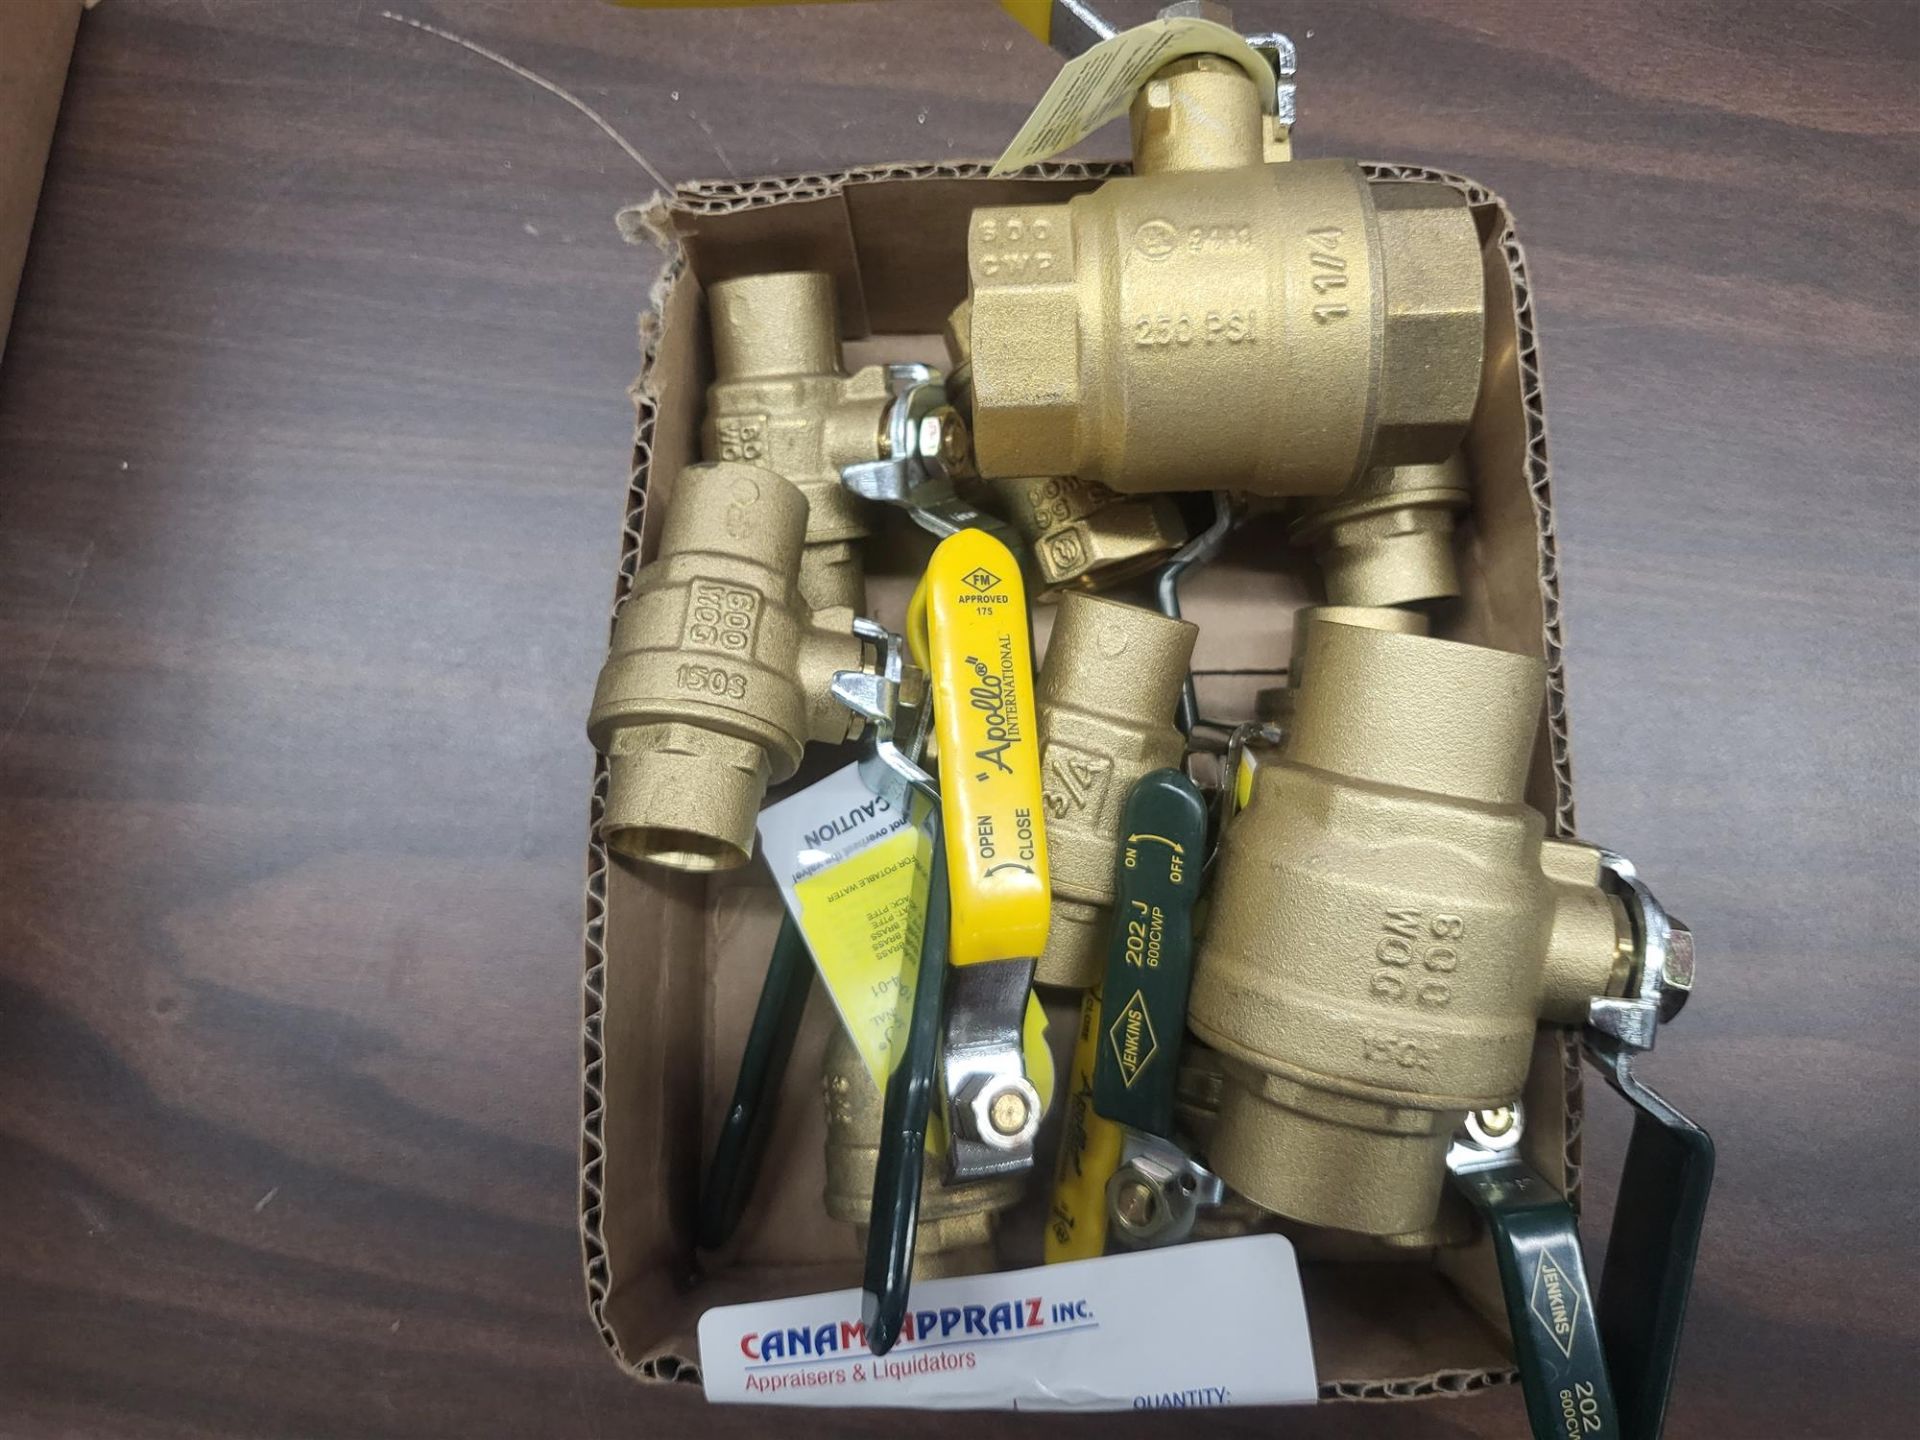 Mixed Lot of Ball Valves - See Photos for Details